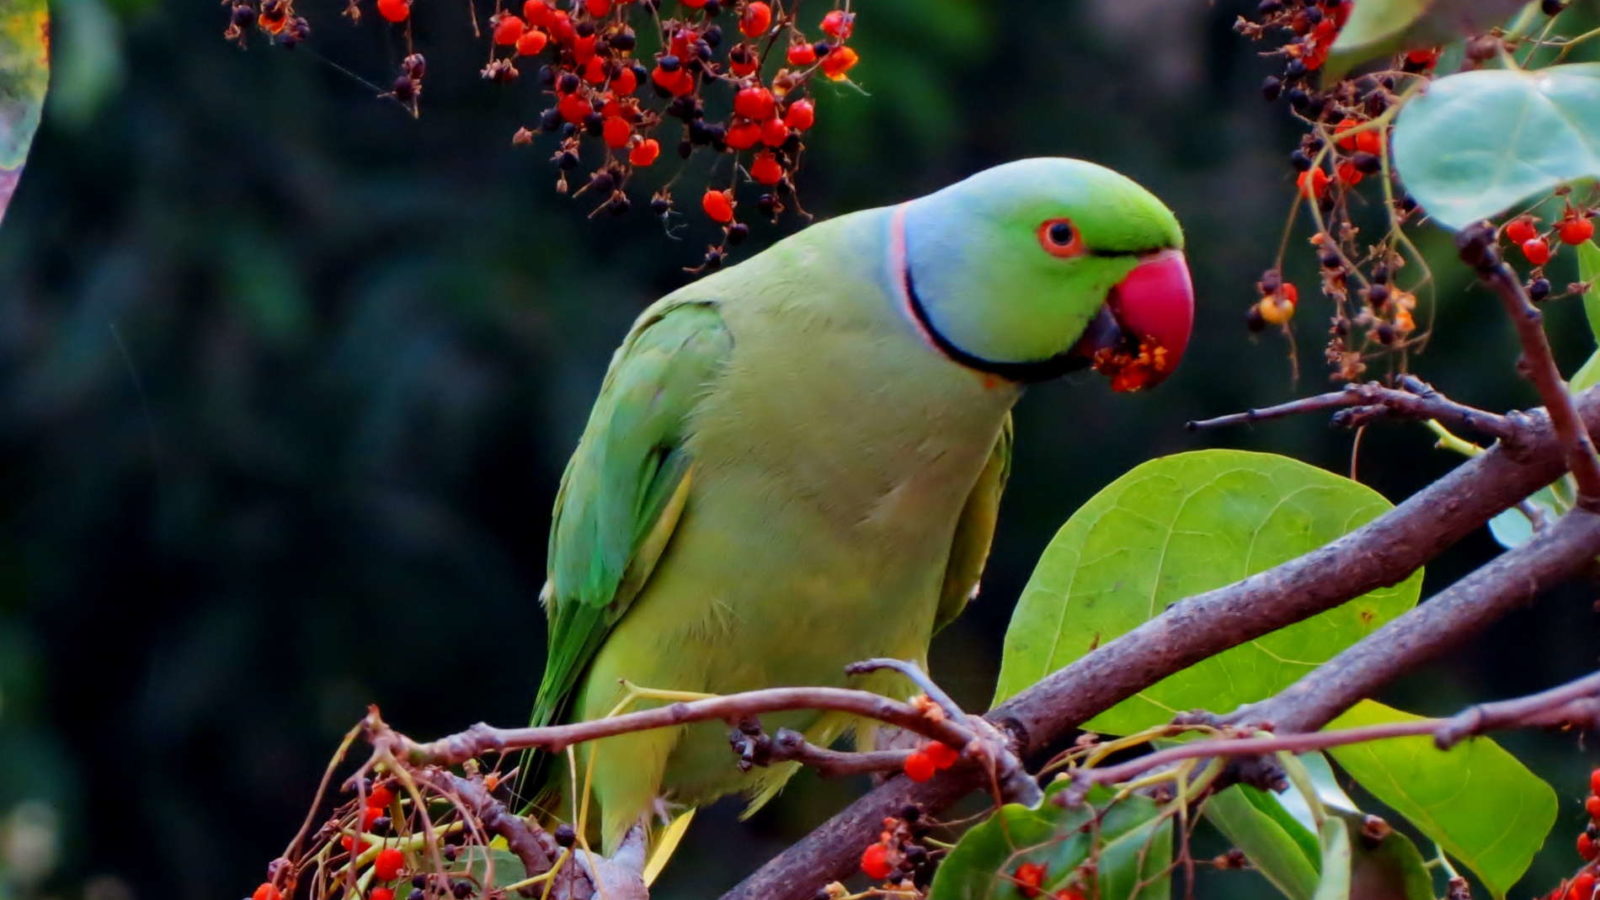 Green Parrot Image - Forever Wallpapers